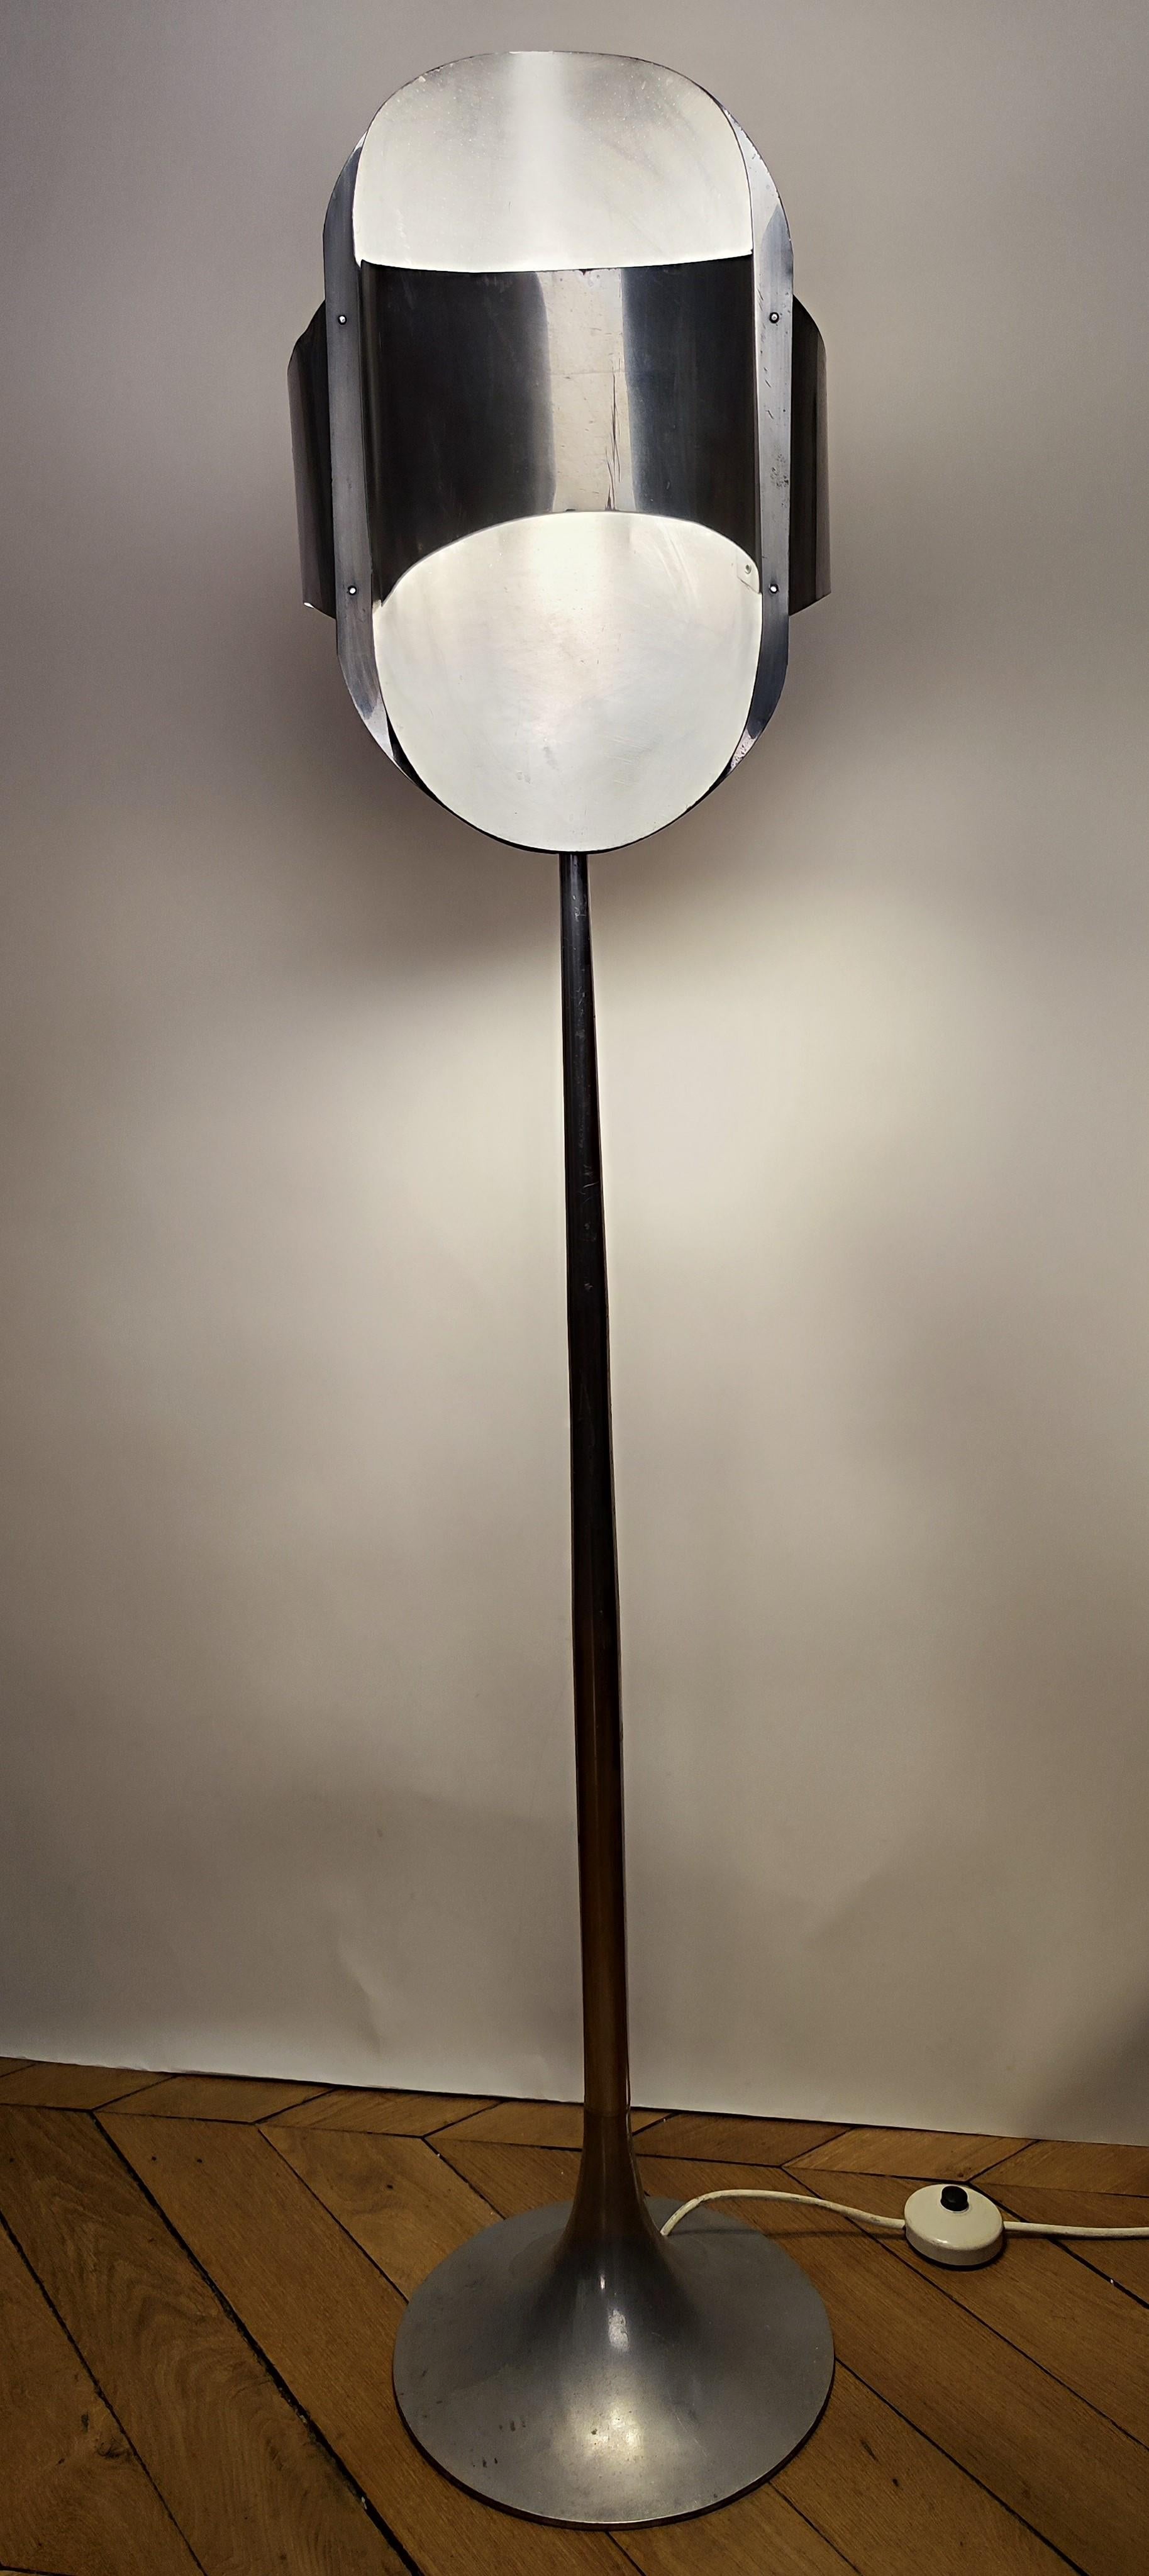 Superb floor lamp which appears to be made of aluminum.
.
It may be attributed to Roger Tallon - 1965-1970 - France.
.
NO exact attribution found but it really look like, so...
.
It is a mix between the so-called 'Sun' floor lamp - M400 series